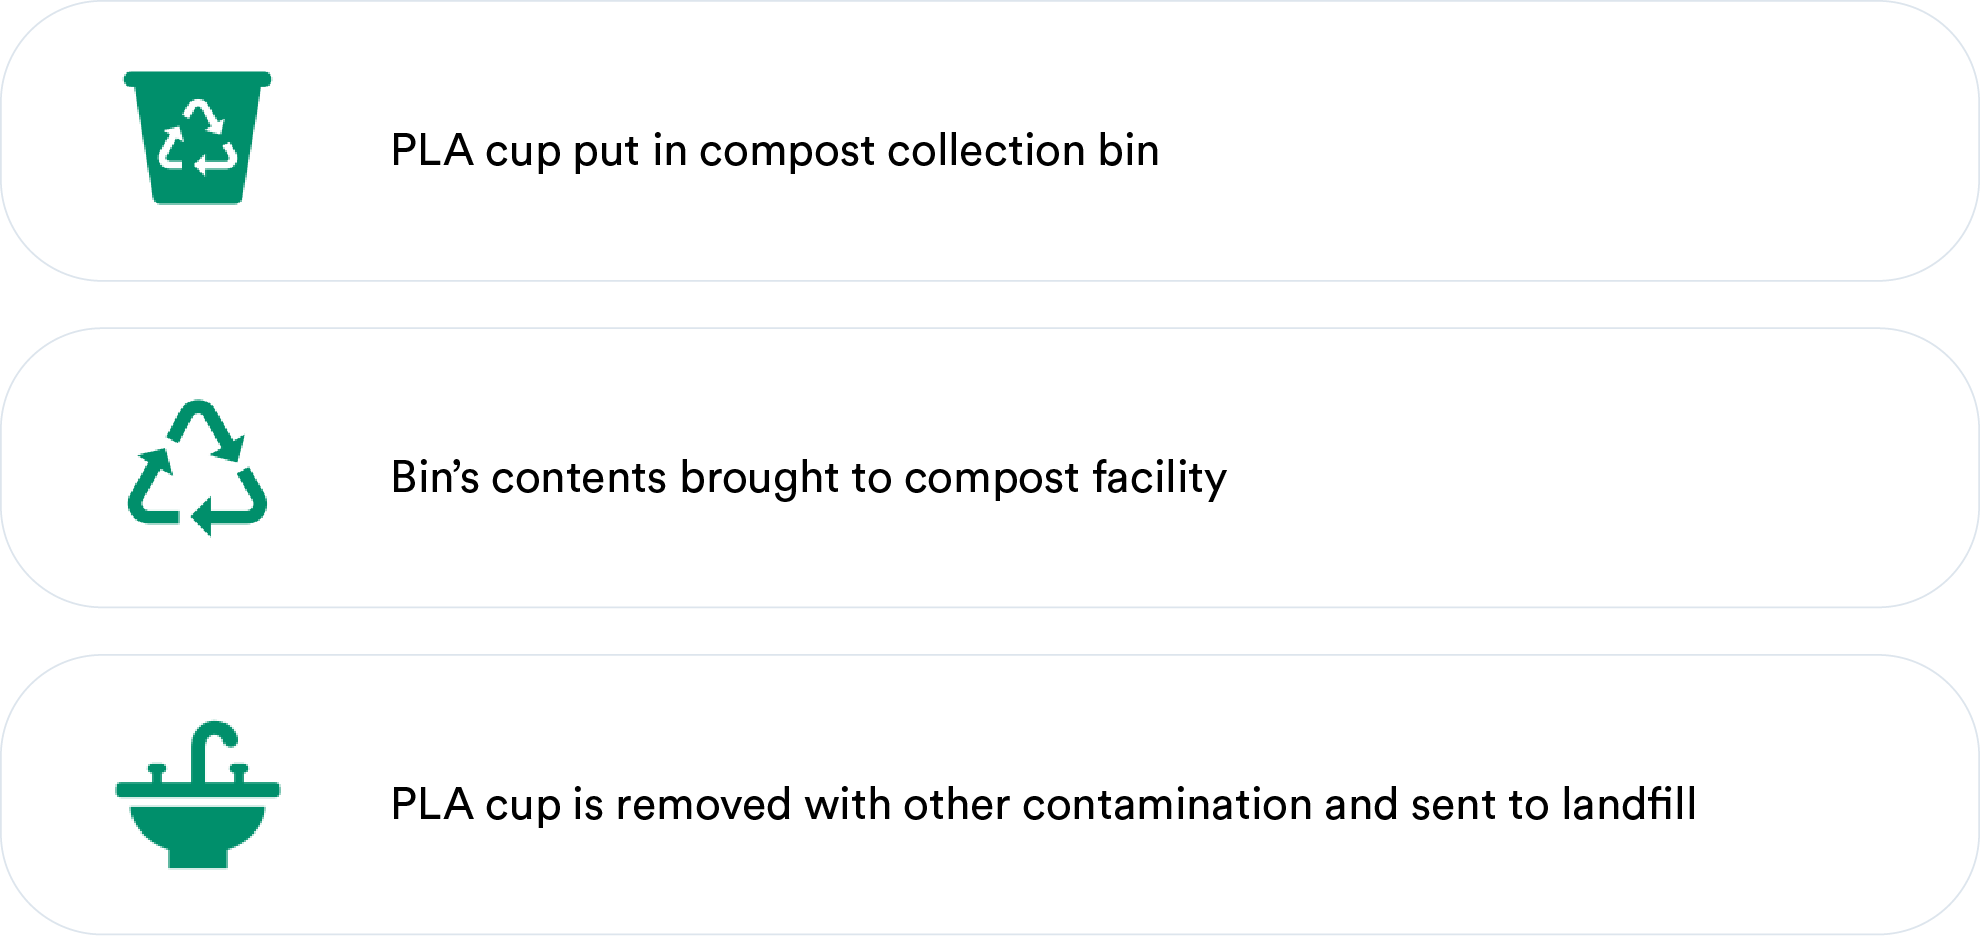 PLA cup put in compost collection bin, bin's contents brought to compost facility, PLA cup is removed from other contamination and sent to landfill